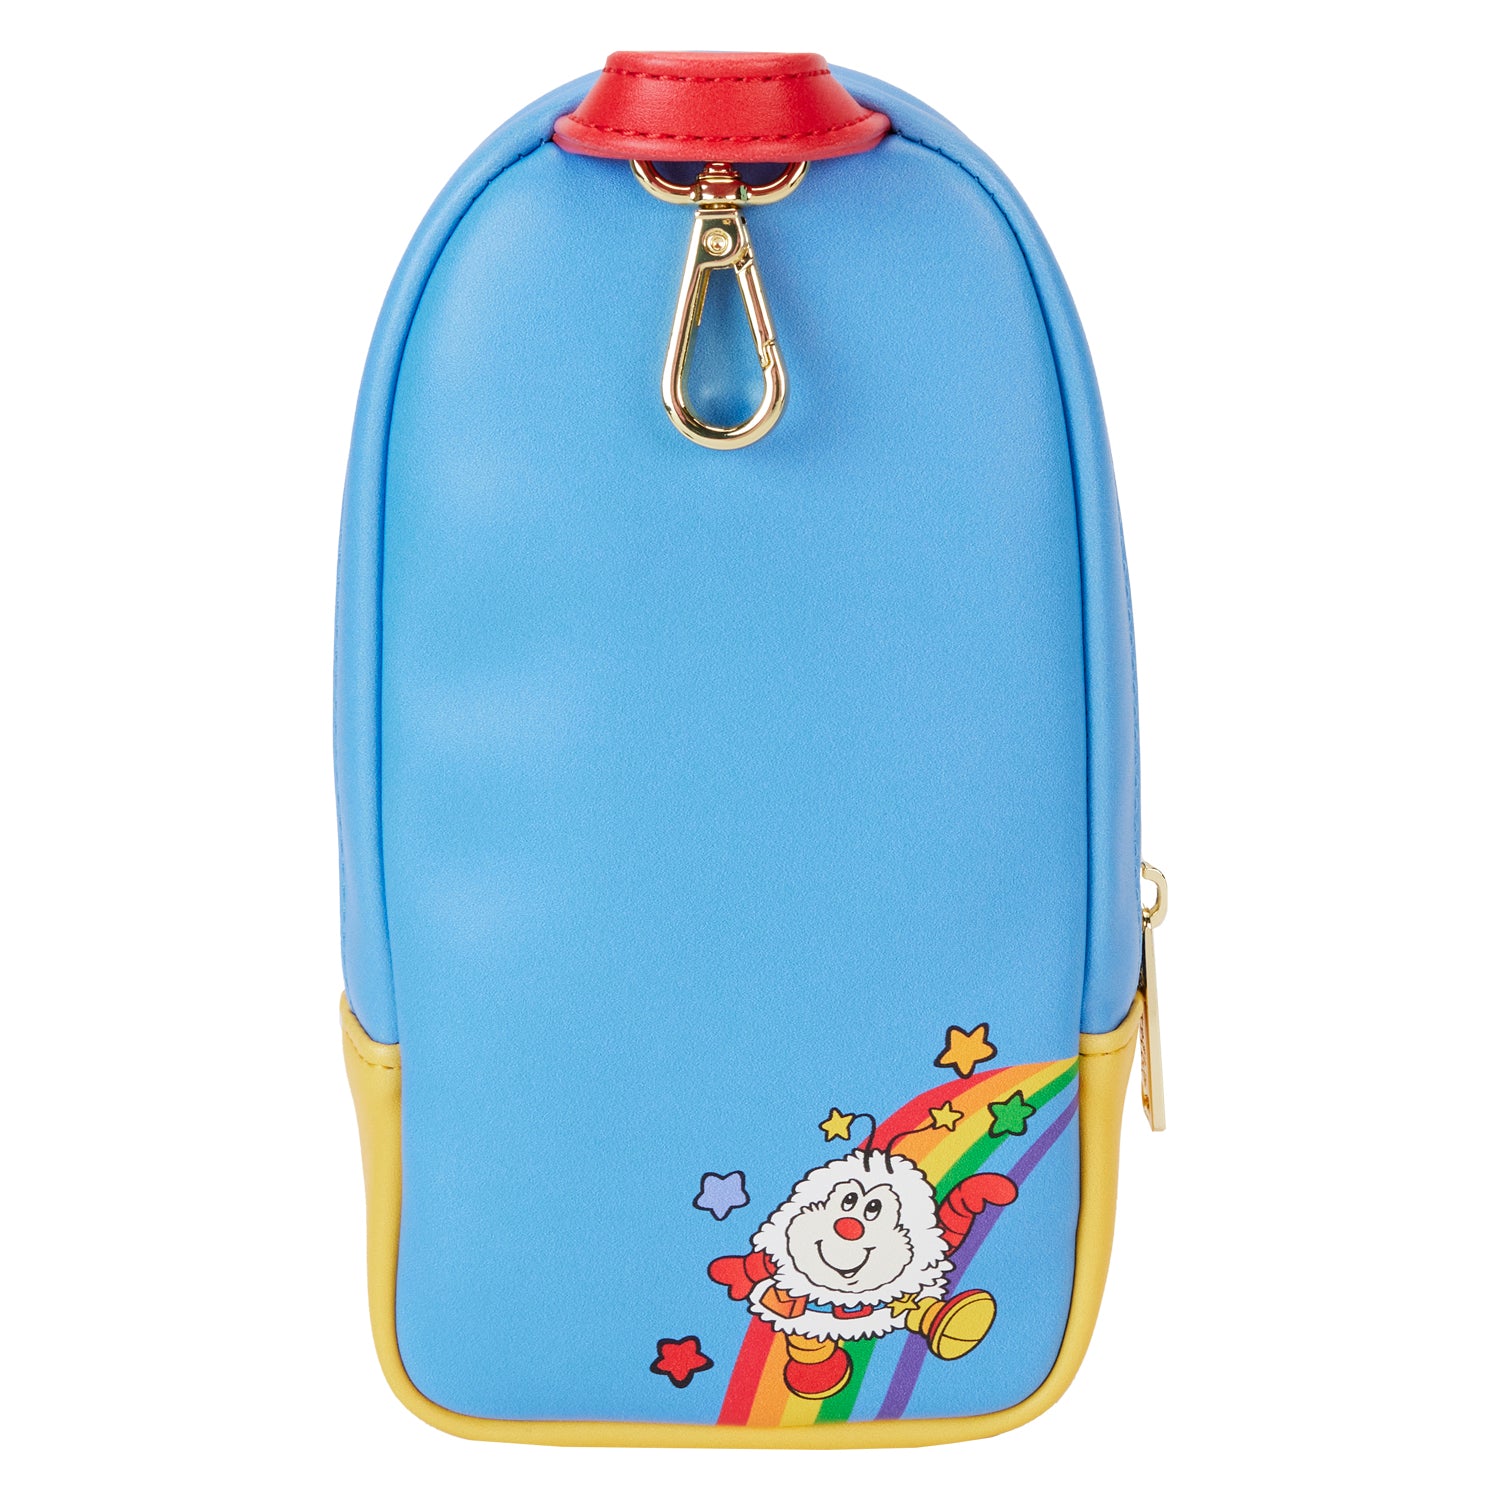 Loungefly Rainbow Brite Castle Mini Backpack Pencil Case